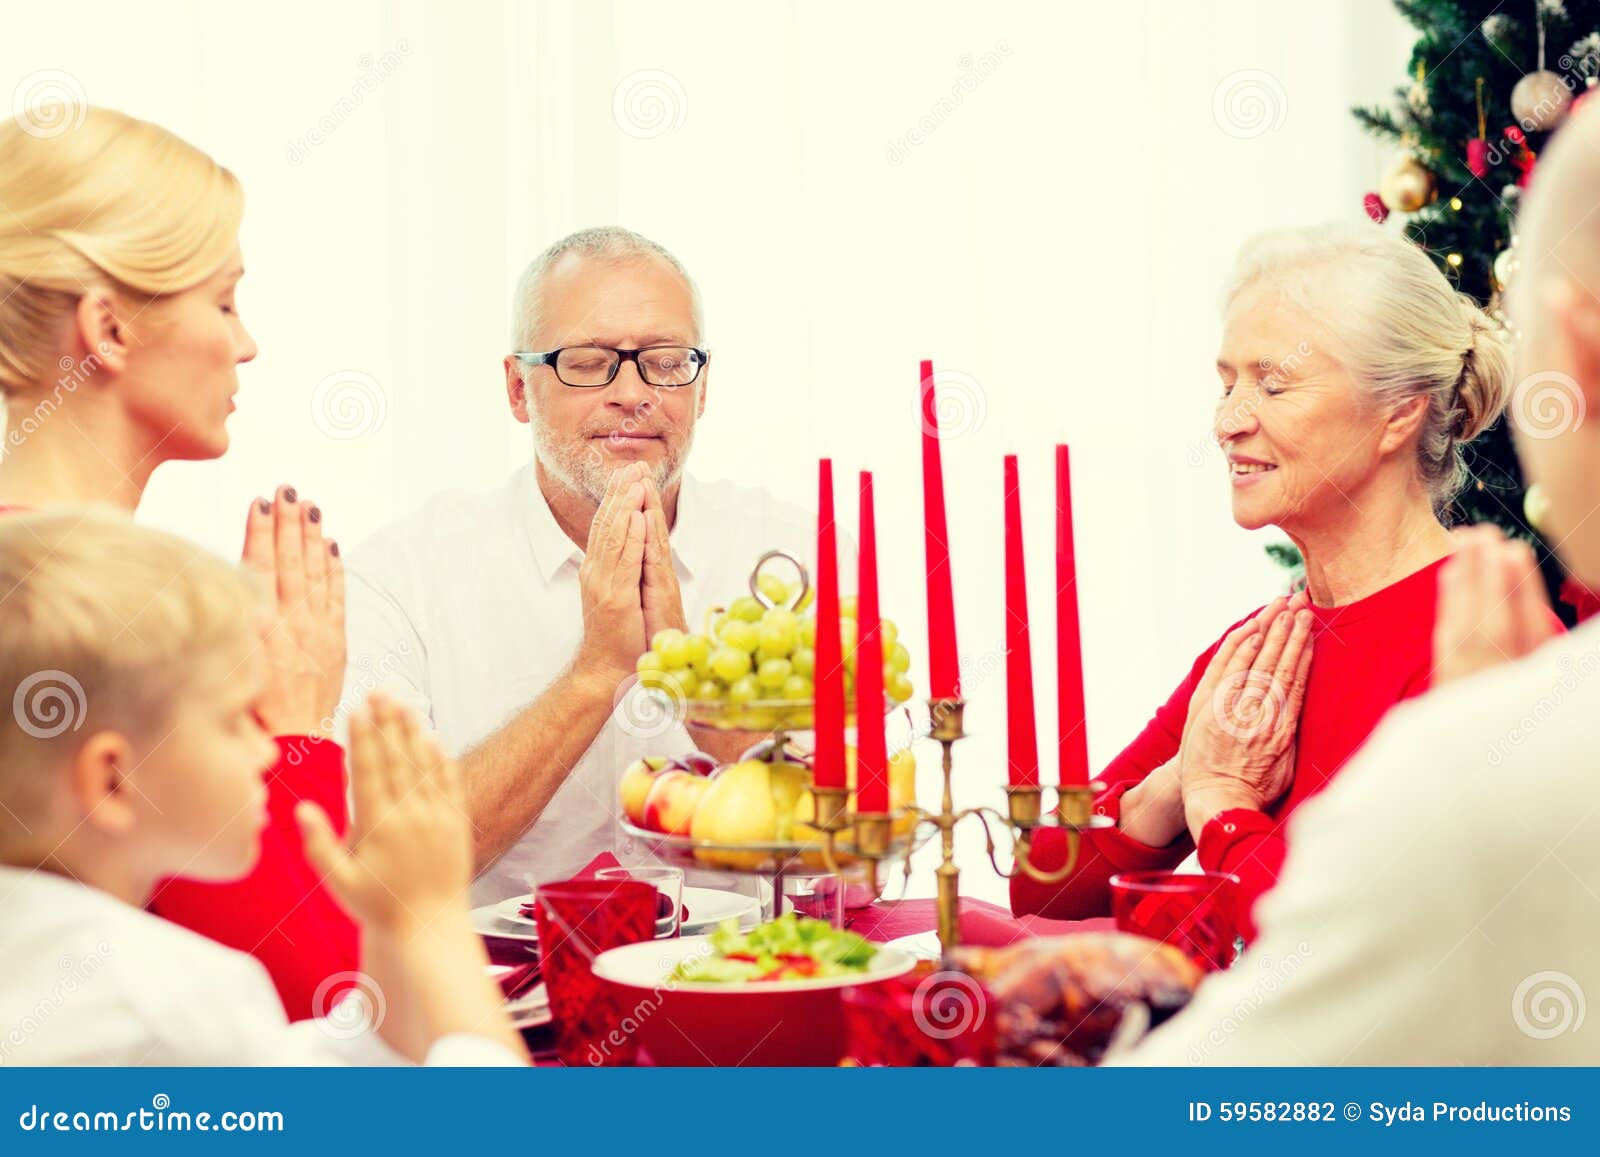 Smiling Family Having Holiday Dinner at Home Stock Photo - Image of